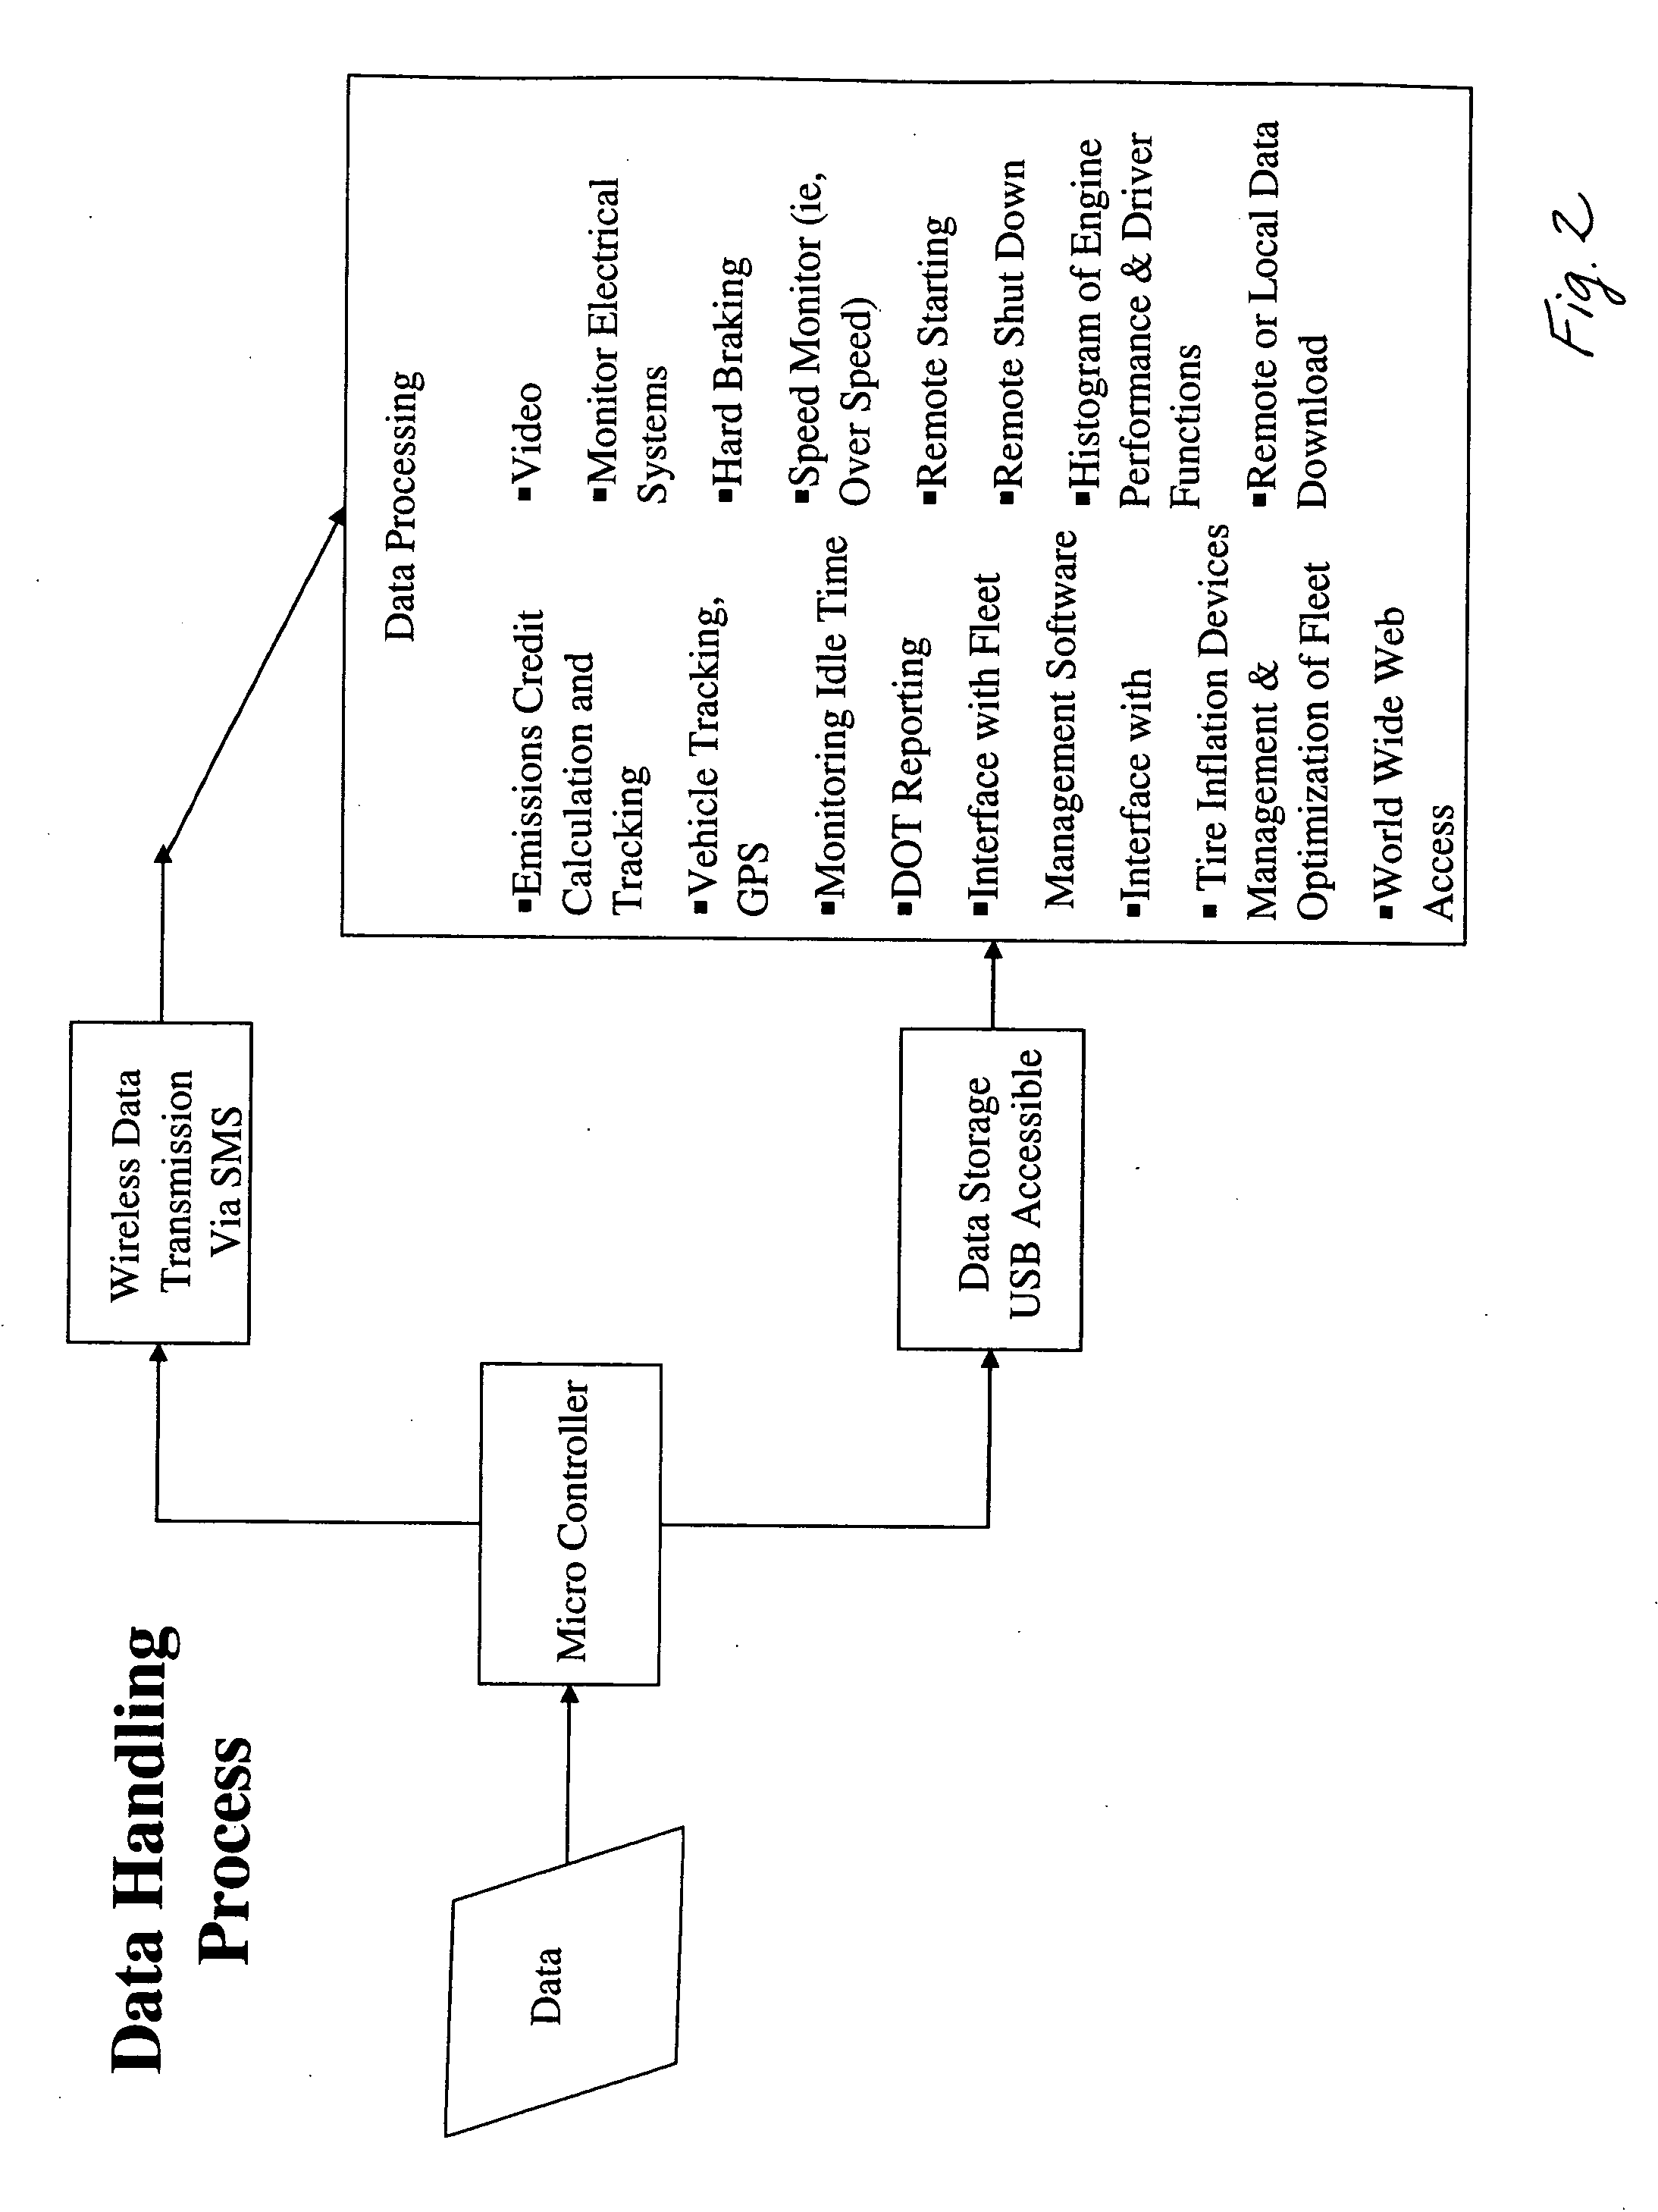 Systems and methods for remote vehicle management